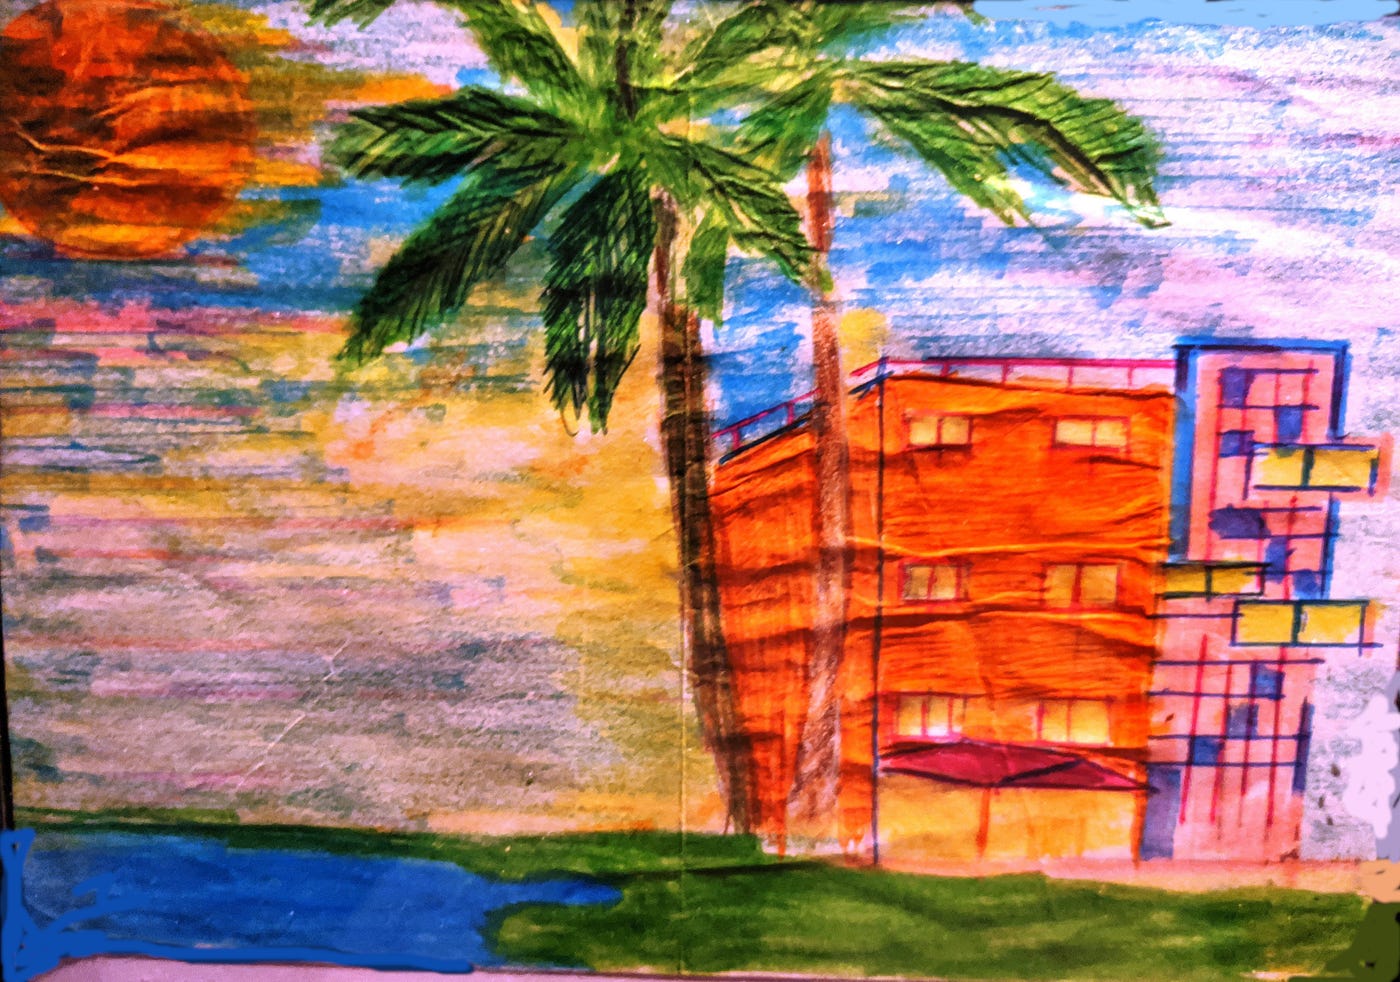 Category ∙ Art Collection on ILLUMINATION ∙ Subcategory ∙ Art by Keira Fulton-Lees ∙ Title ∙ Miami Beach Art Deco